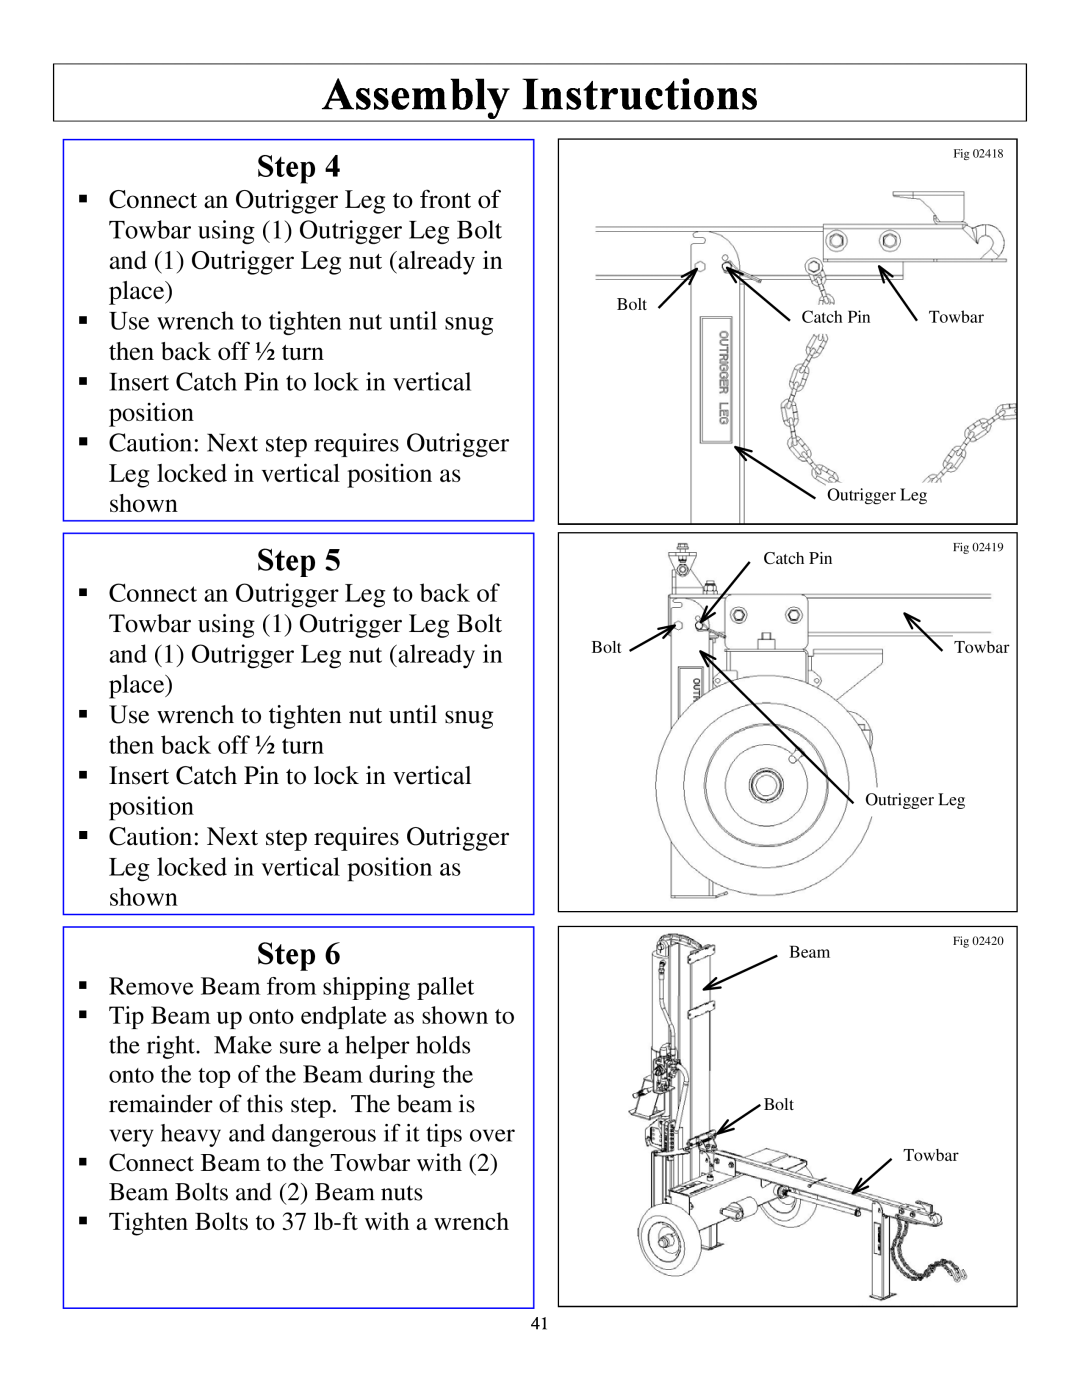 North Star M1108D owner manual Assembly Instructions, Step 